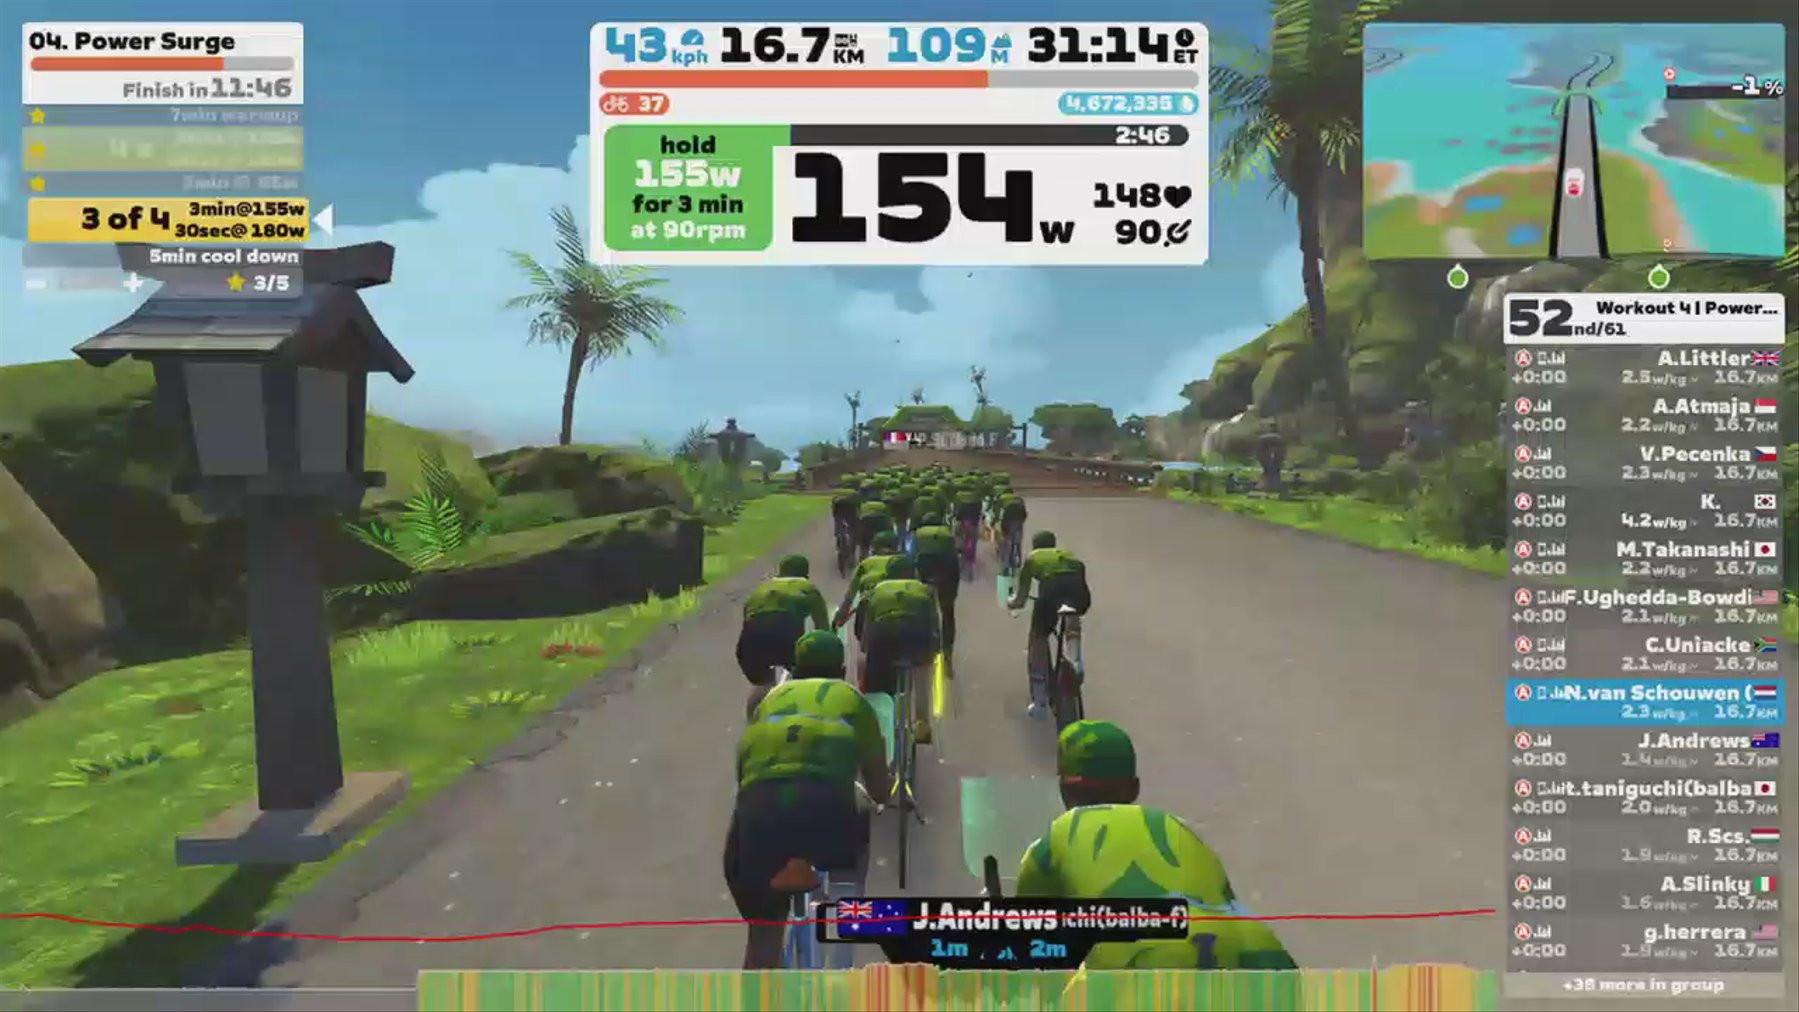 Zwift - Group Workout: Long - Power Surge  on Turf N Surf in Makuri Islands